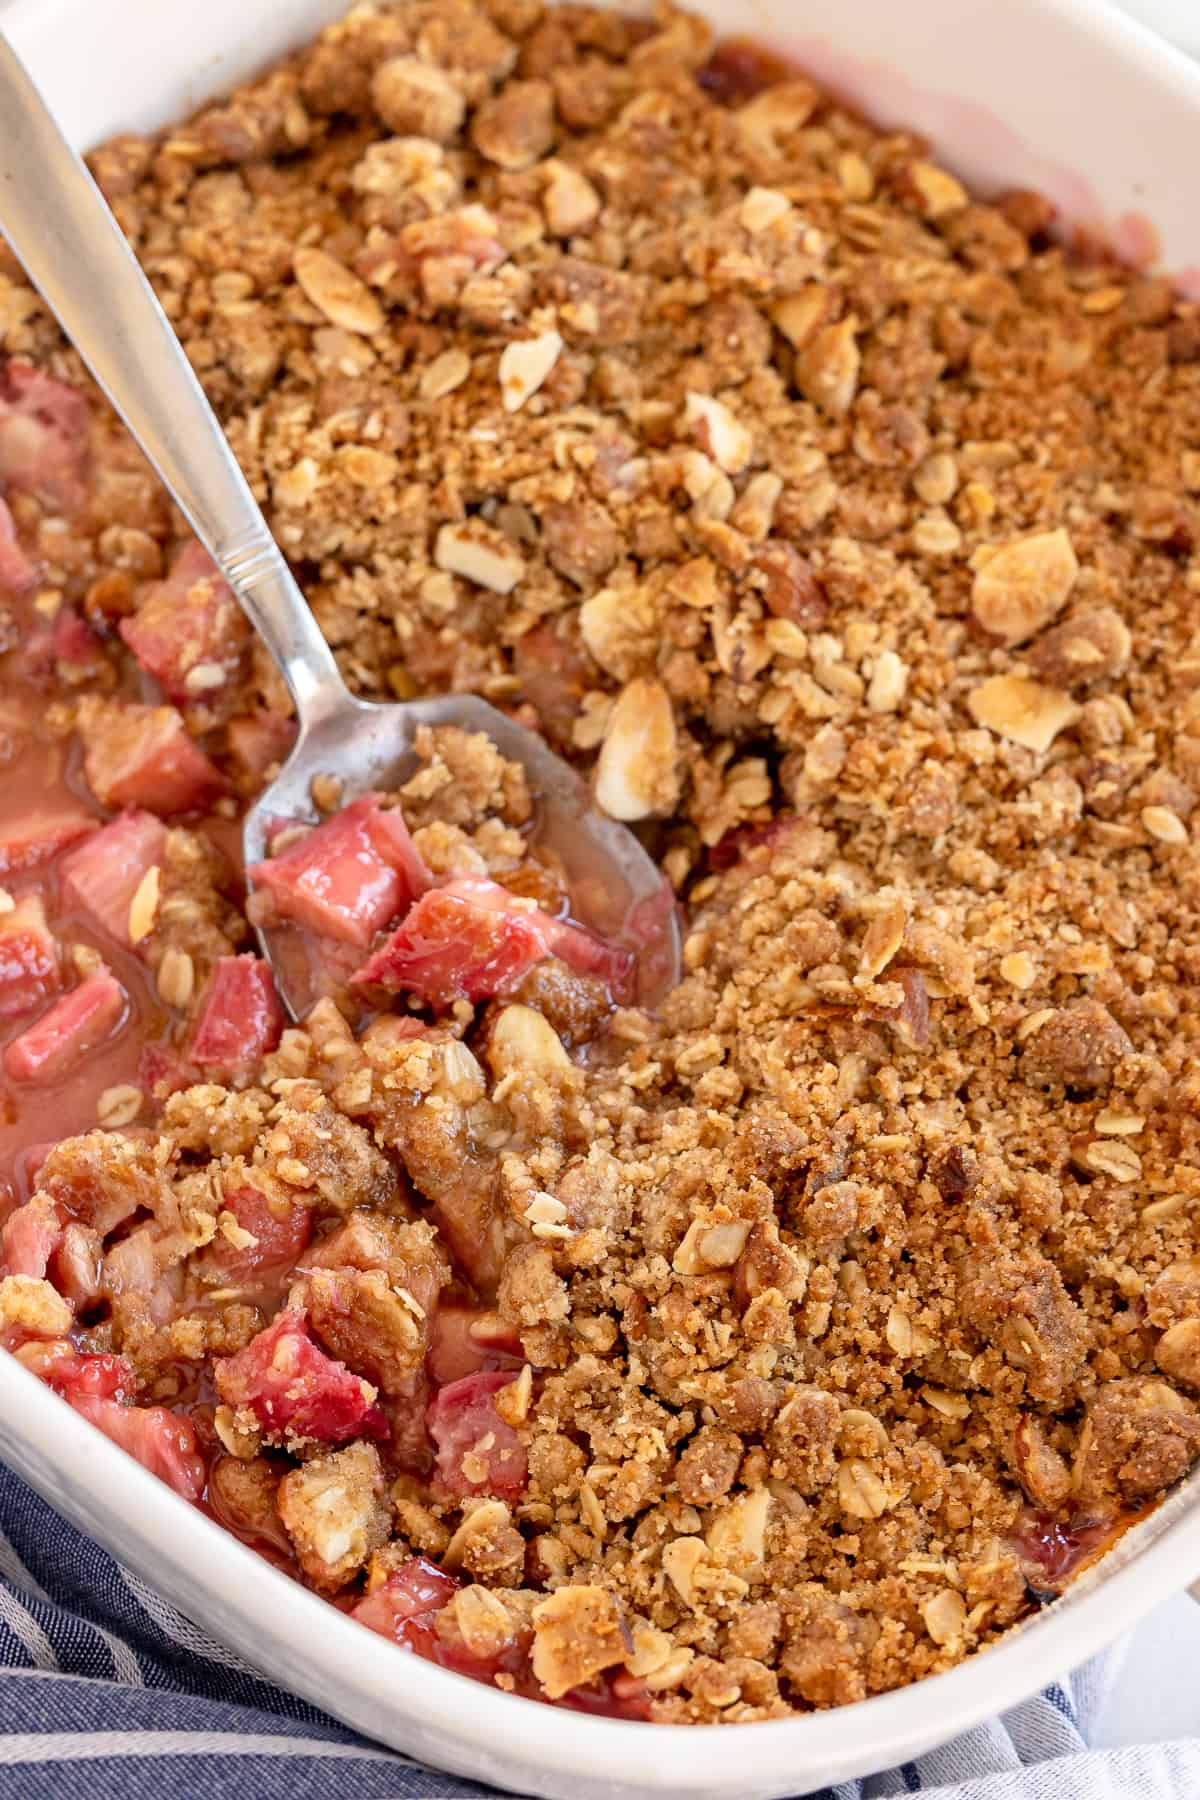 A spoon scoops Rhubarb Crisp from a baking dish.